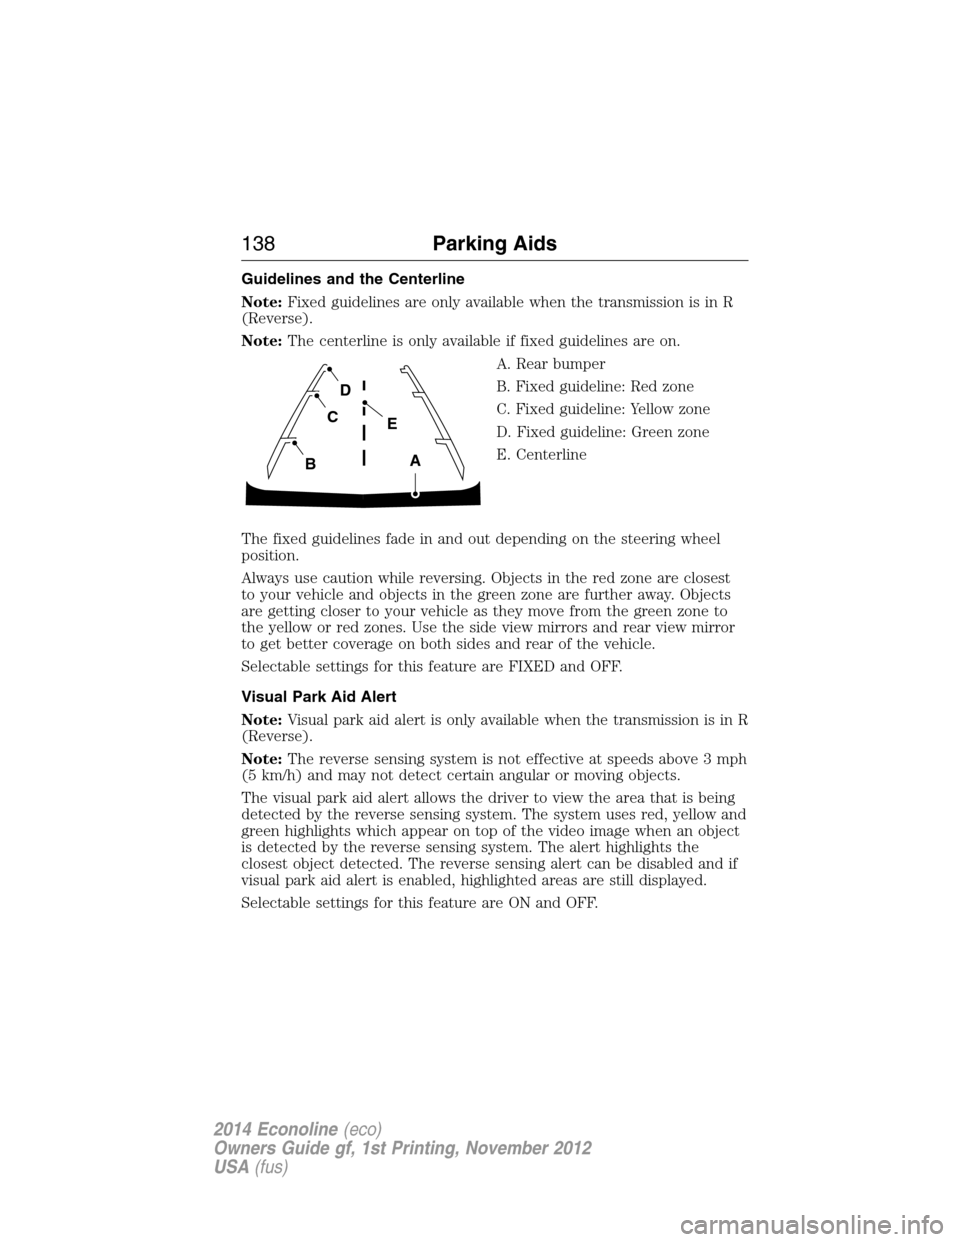 FORD E SERIES 2014 4.G Owners Manual Guidelines and the Centerline
Note:Fixed guidelines are only available when the transmission is in R
(Reverse).
Note:The centerline is only available if fixed guidelines are on.
A. Rear bumper
B. Fixe